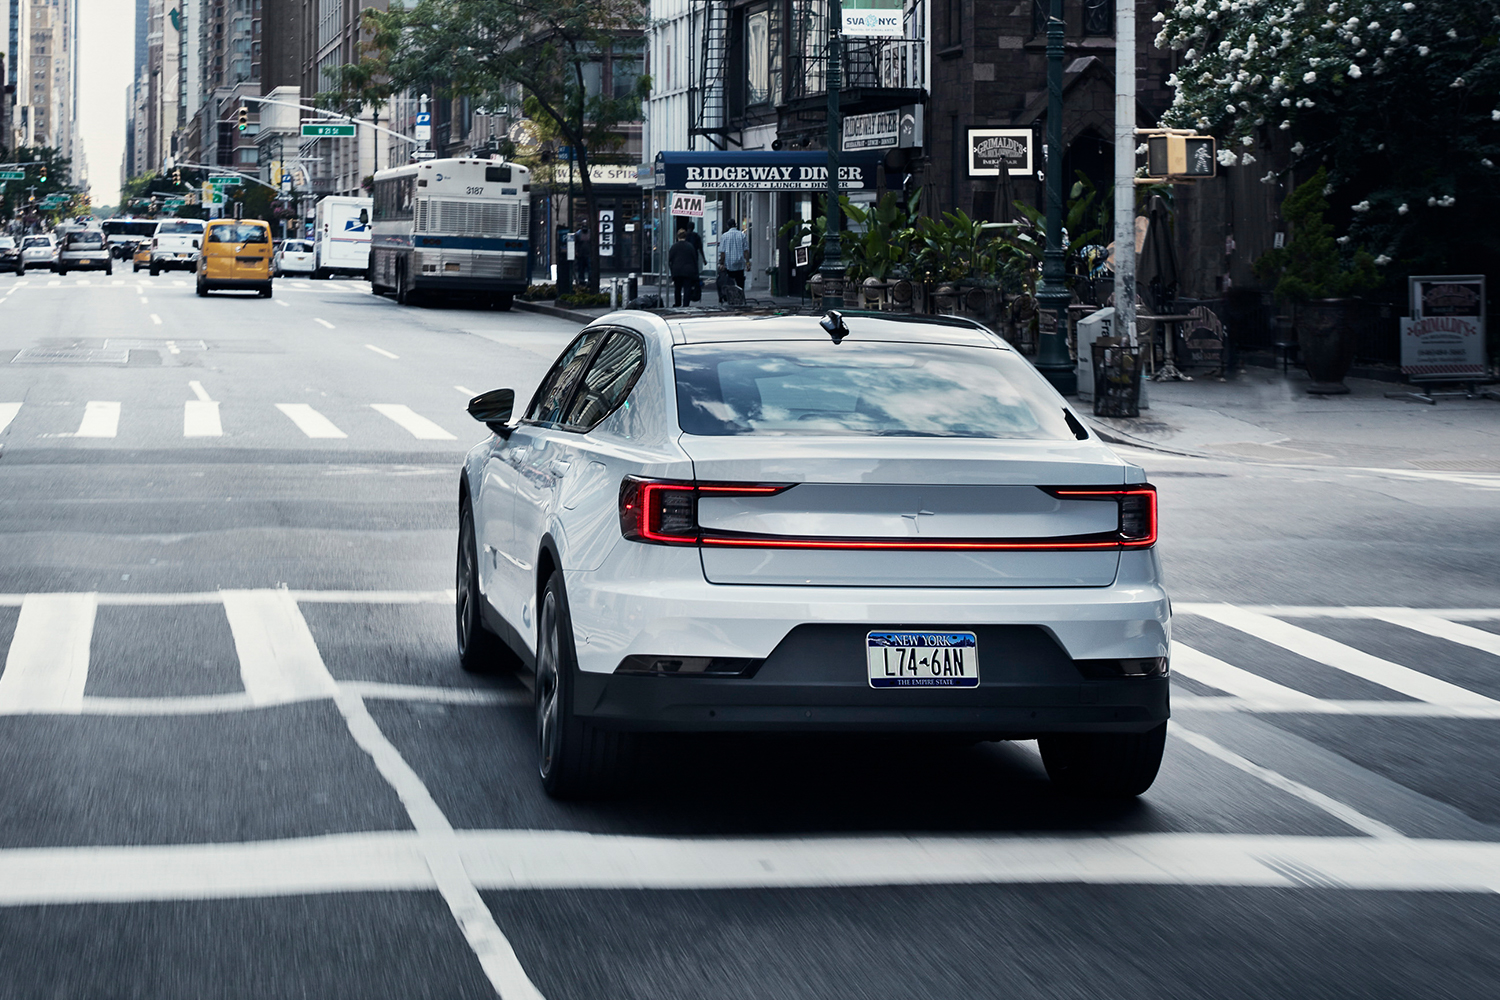 The 2021 Polestar 2 driving down the streets of New York City